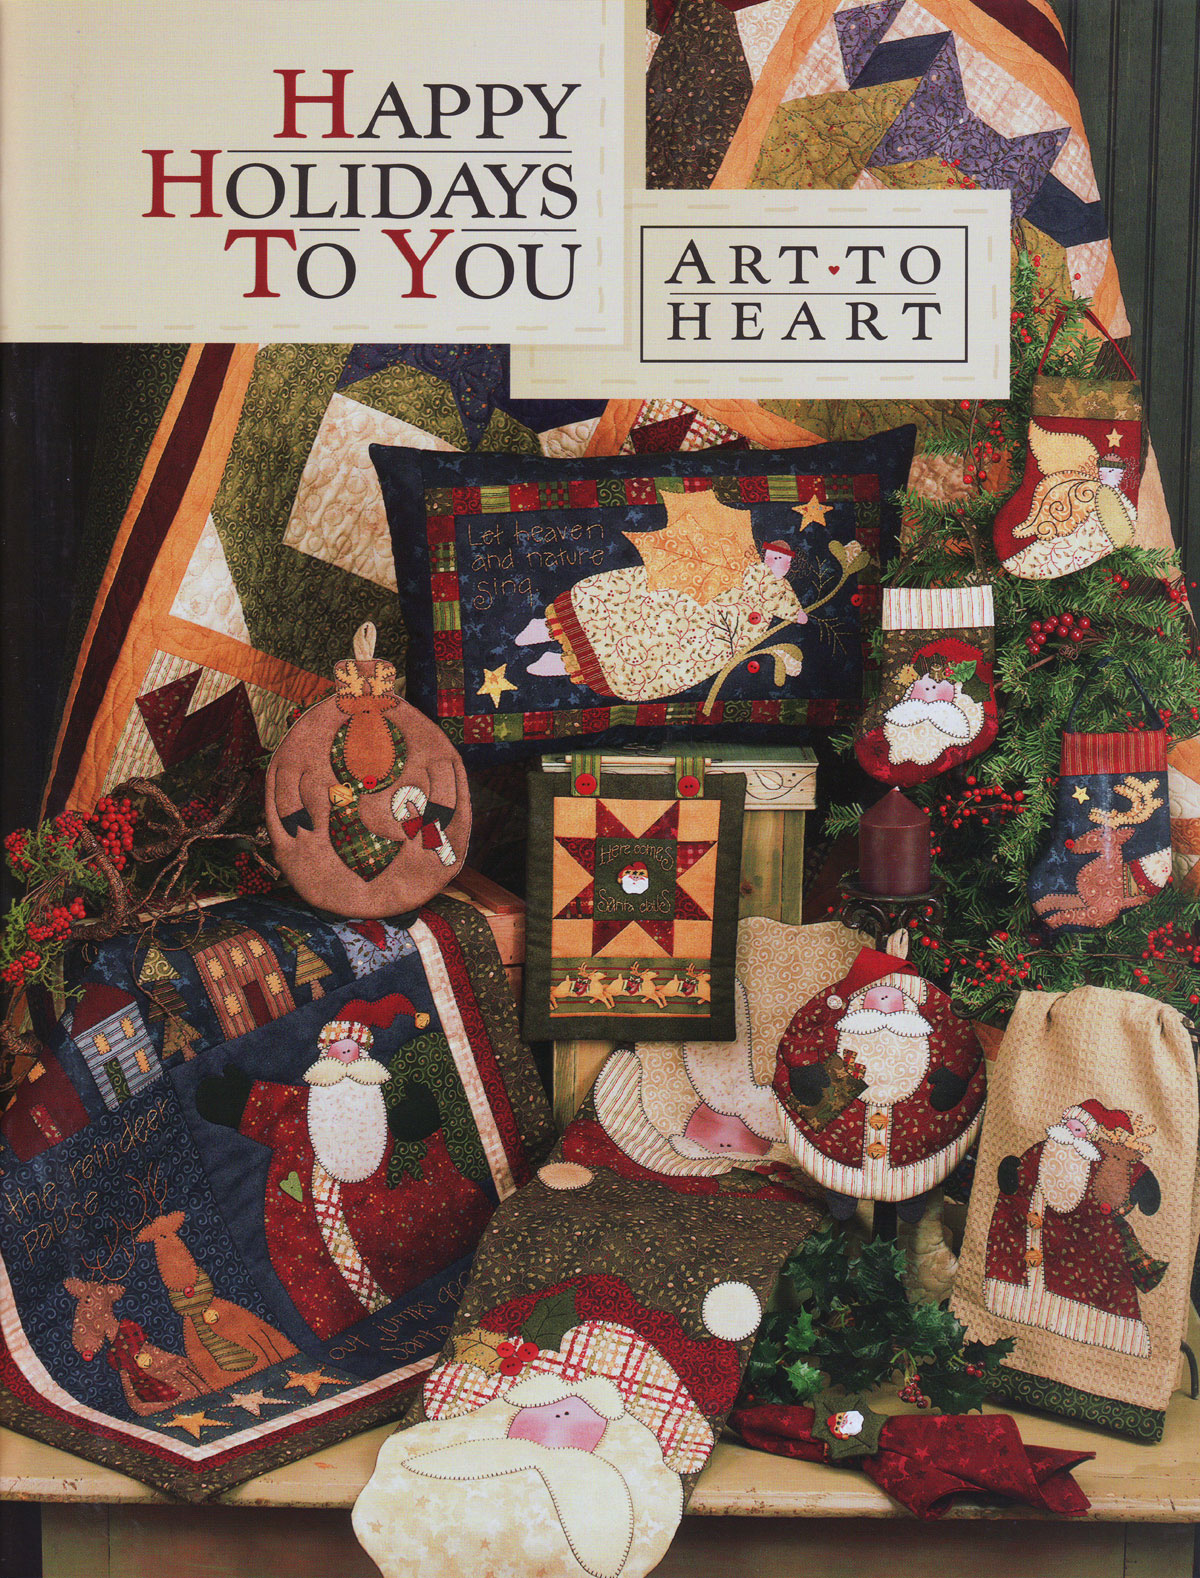 Happy-Holidays-to-You-sewing-pattern-book-Art-To-Heart-front